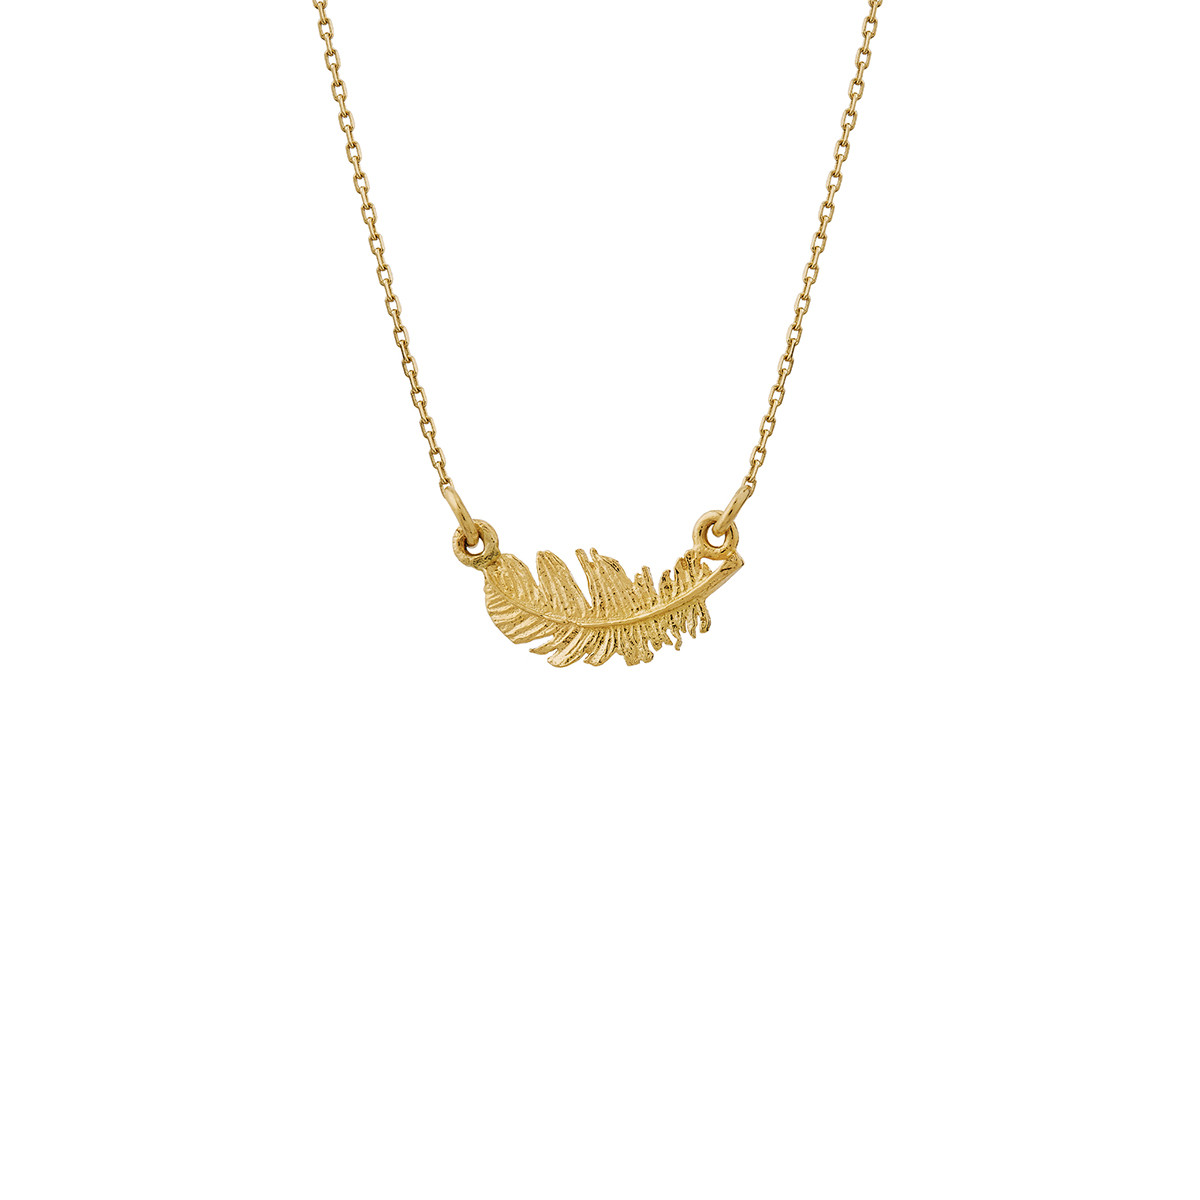 In-Line Plume Necklace by Alex Monroe available to buy online at tomfoolery london